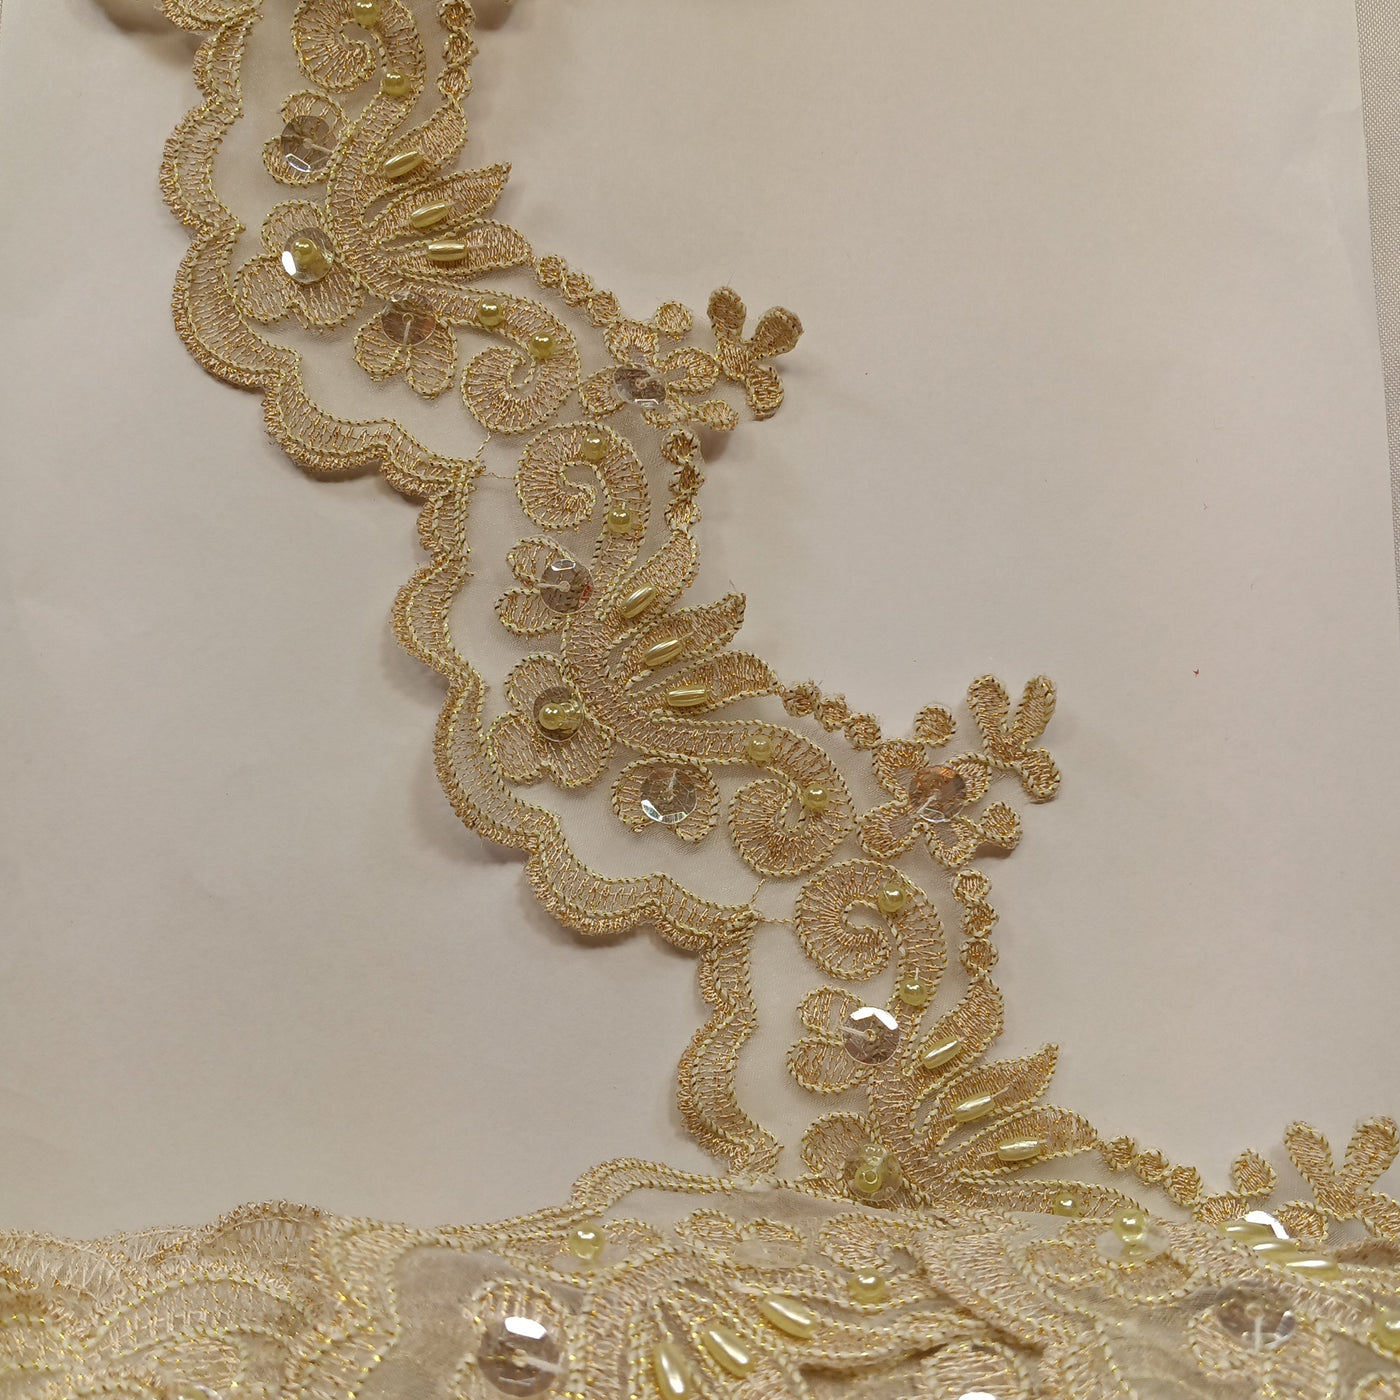 Corded, Beaded & Embroidered Antique Gold Trimming. Lace Usa